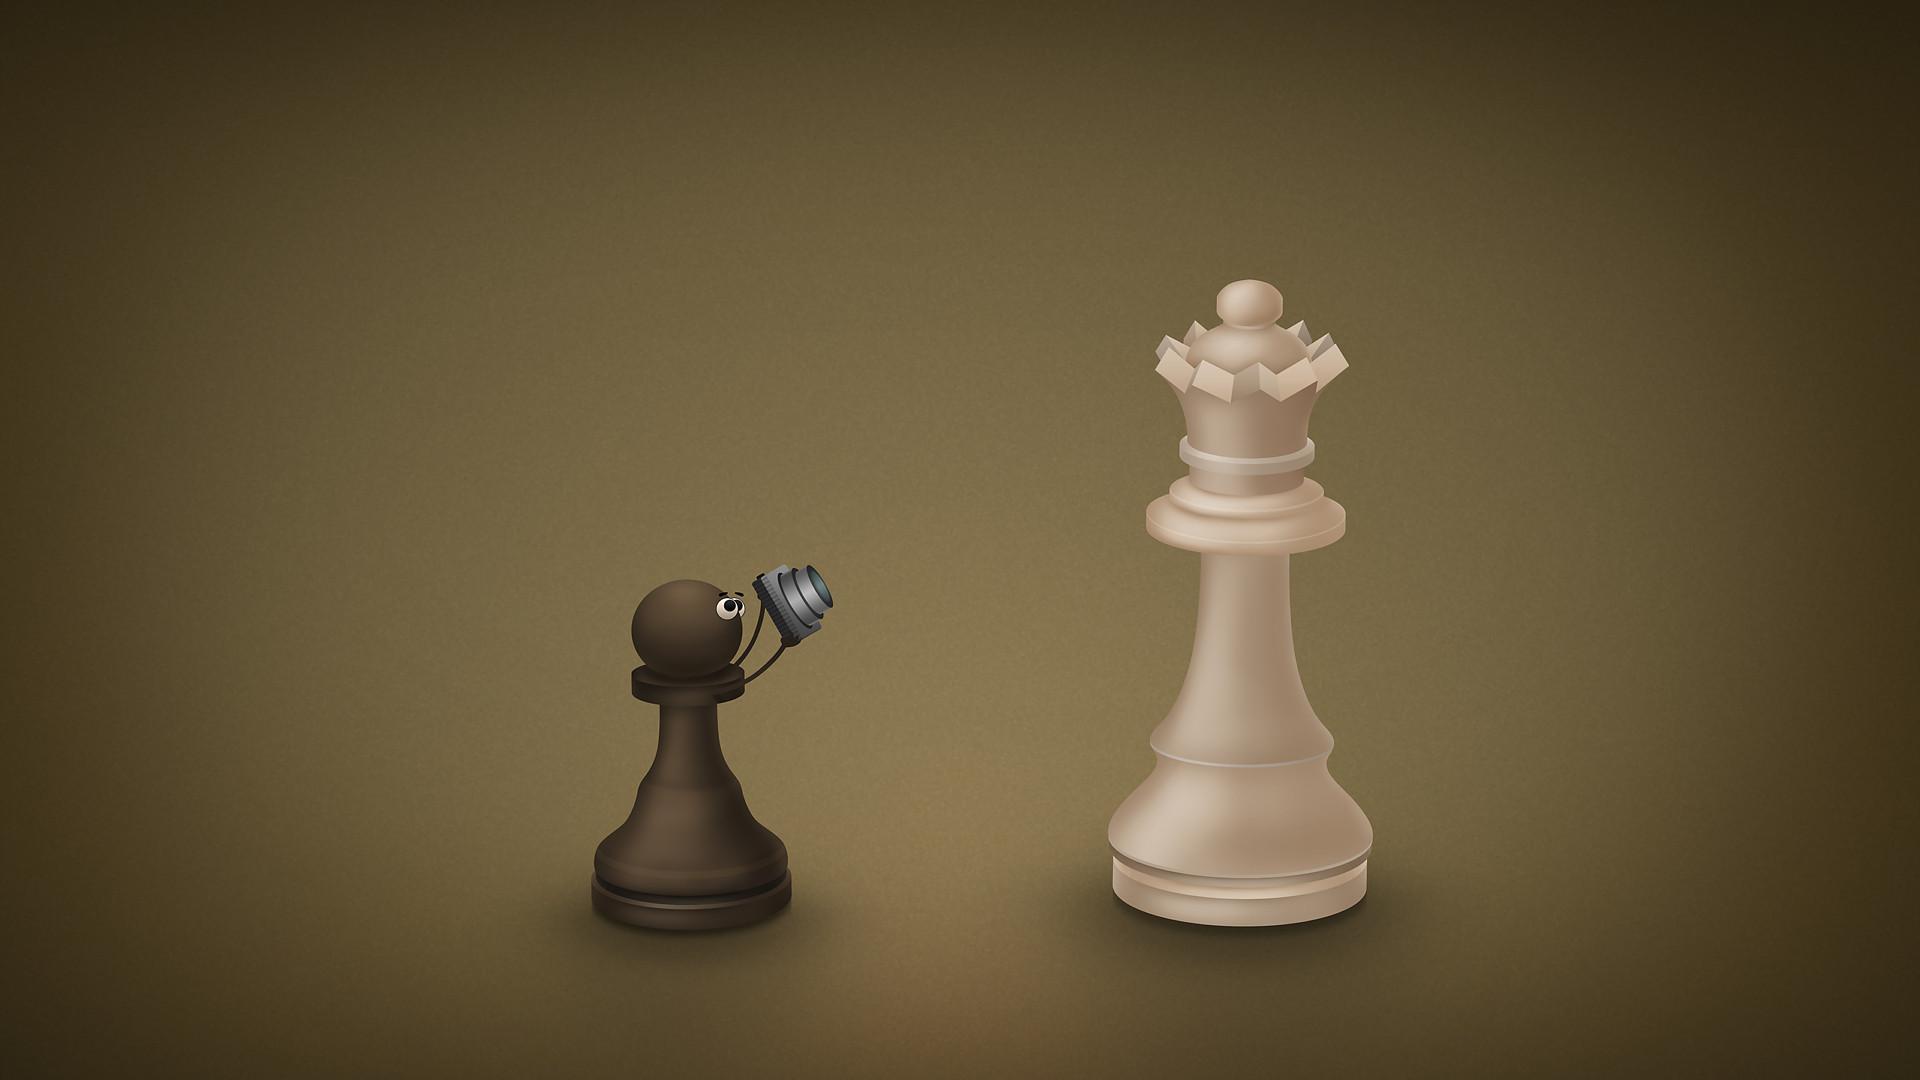 something you don't see too often: a chess wallpaper. found on /r